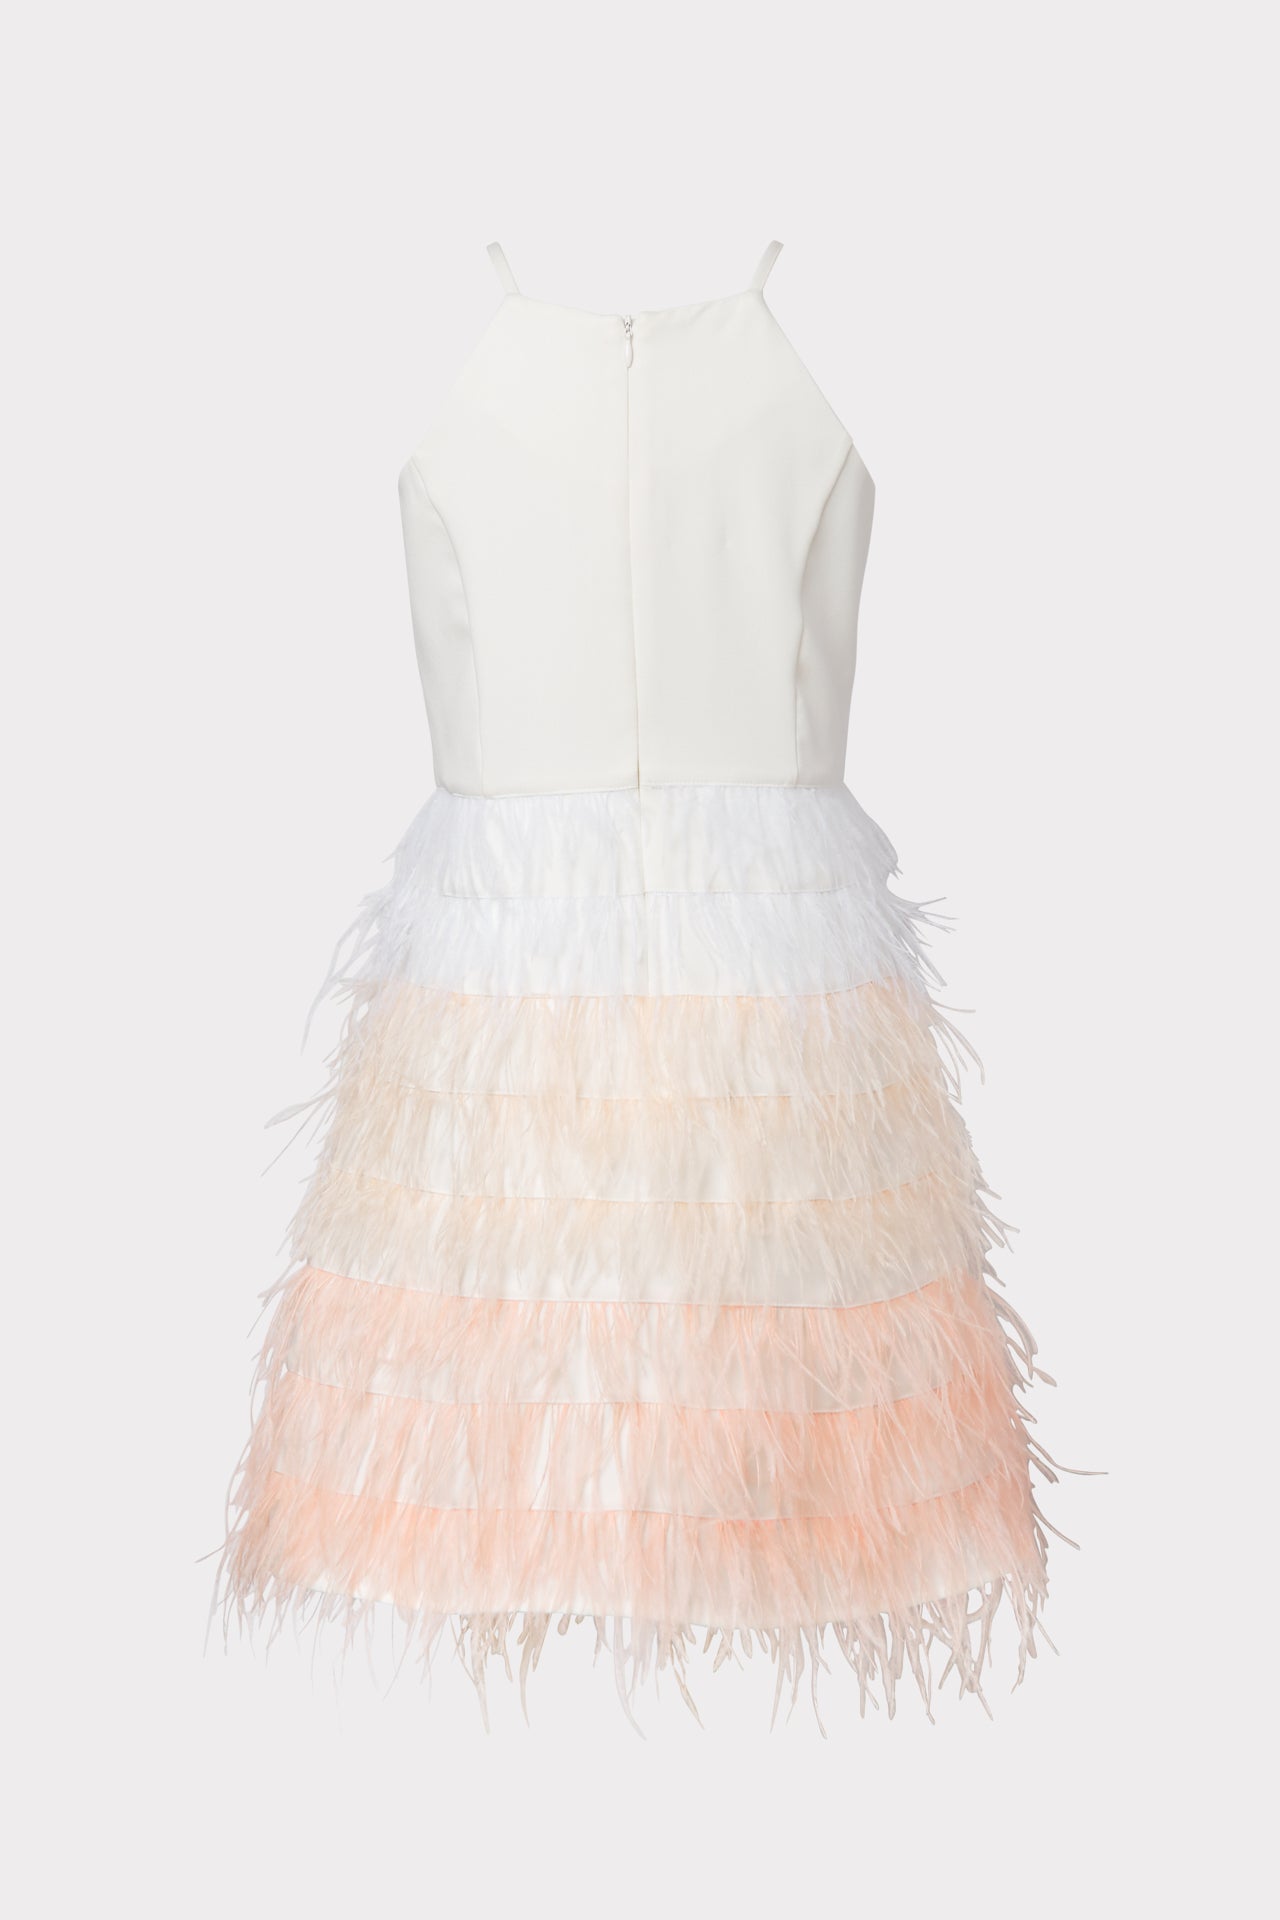 Milly Minis Feather Cady Dress | MILLY